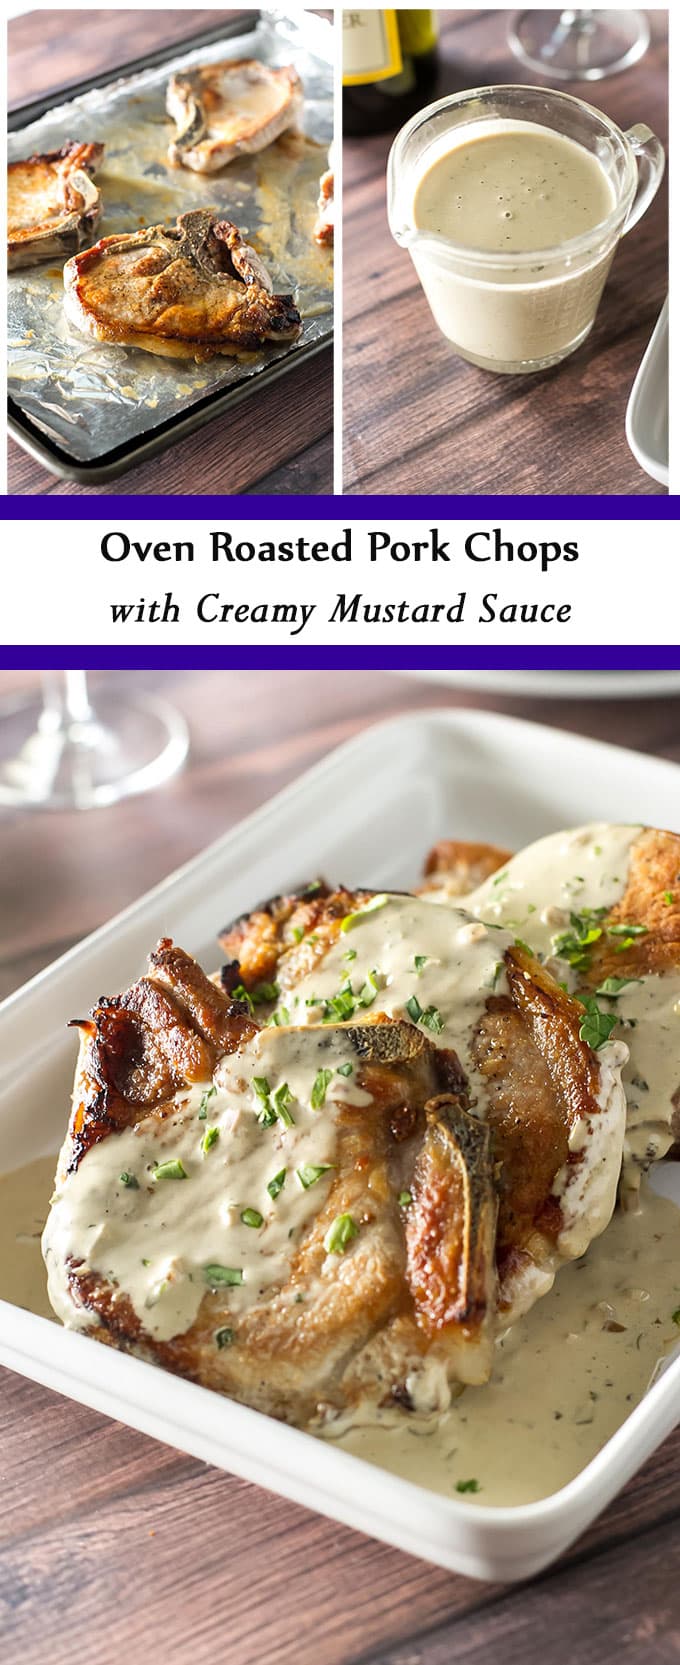 Easy oven roasted pork chops topped with a creamy mustard sauce . This elegant dish takes only 30 minutes start to finish! | girlgonegourmet.com